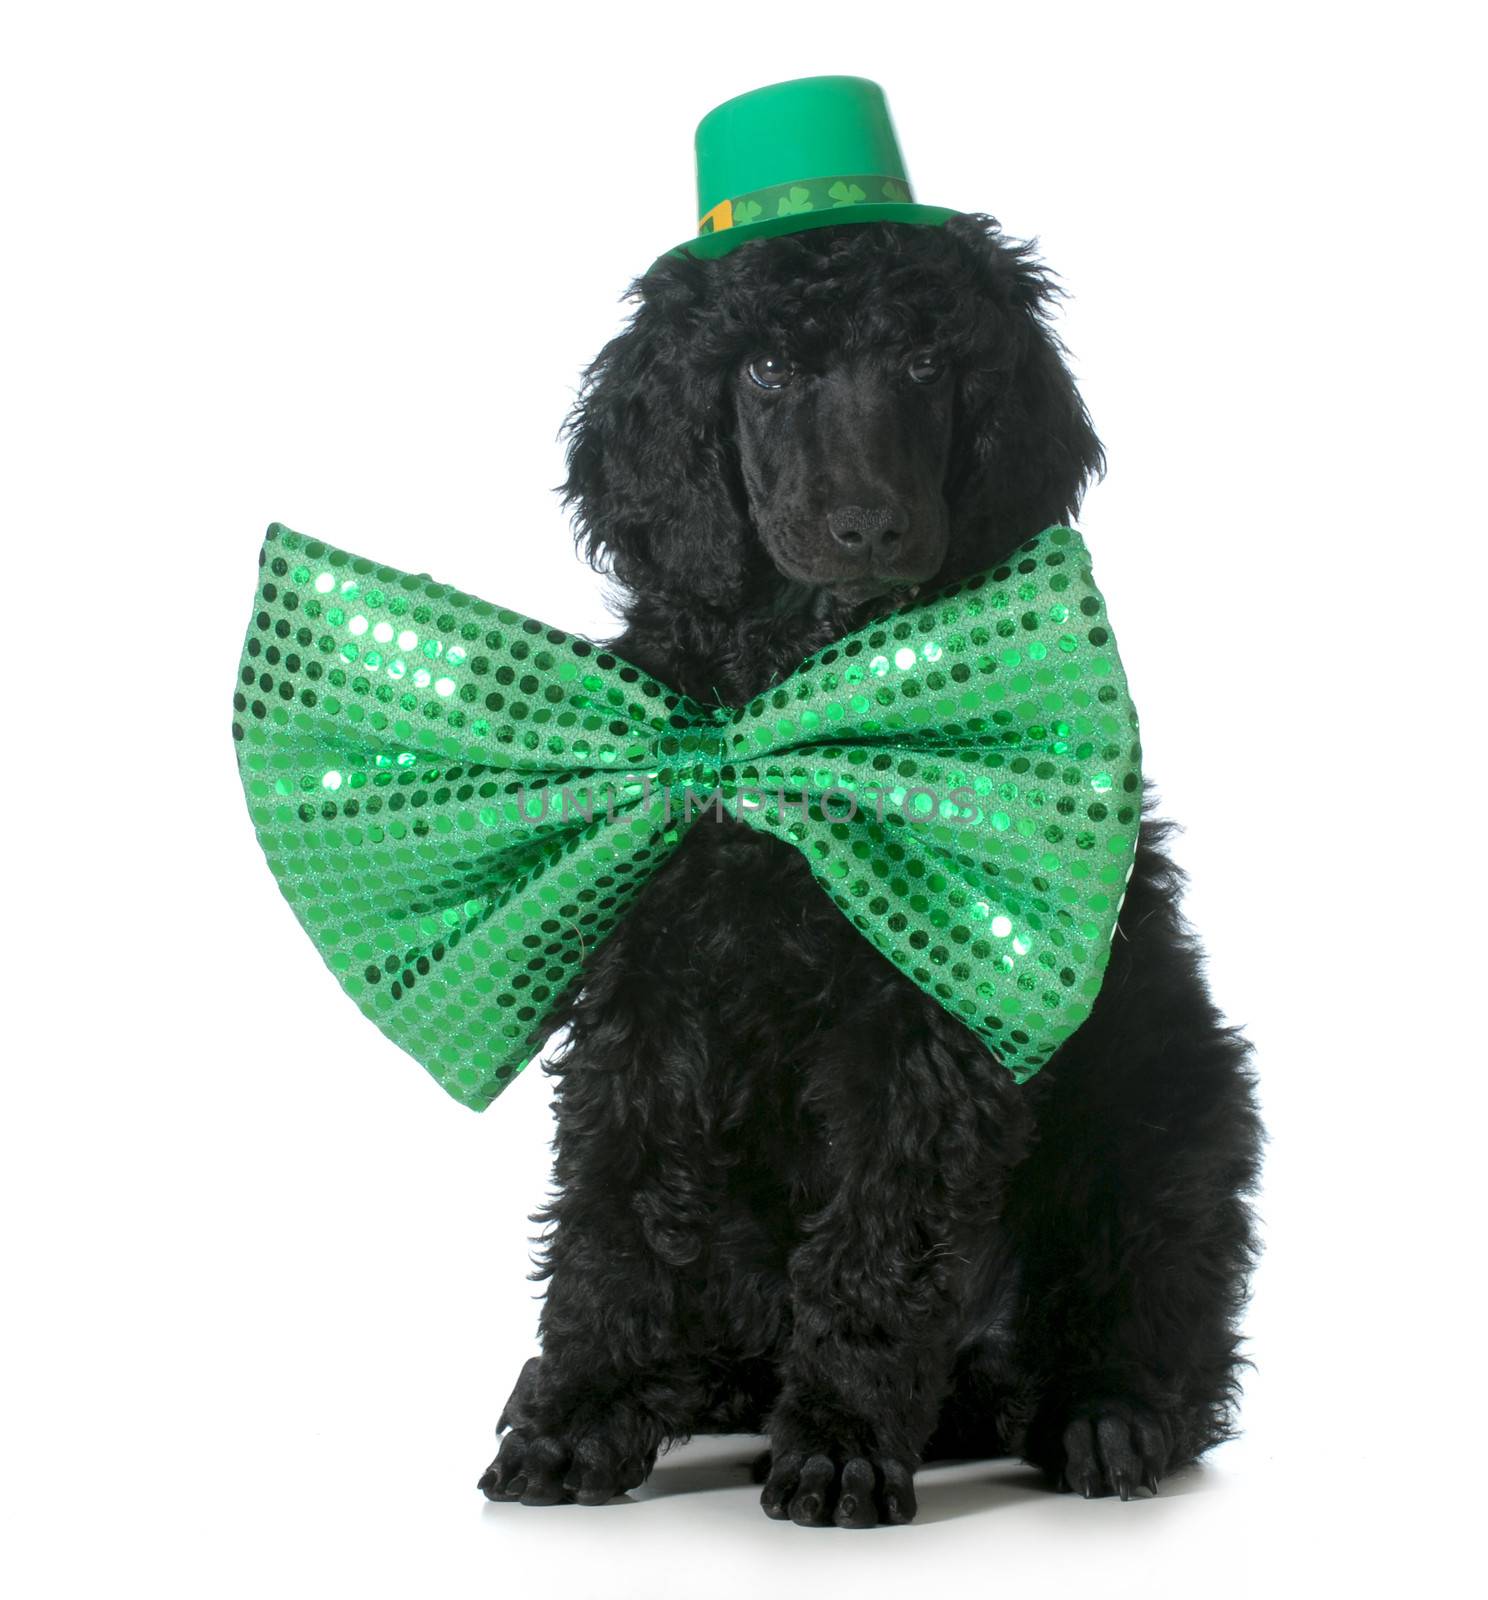 St Patricks Day dog - standard poodle puppy wearing green hat and tie sitting isolated on white background - 8 weeks old